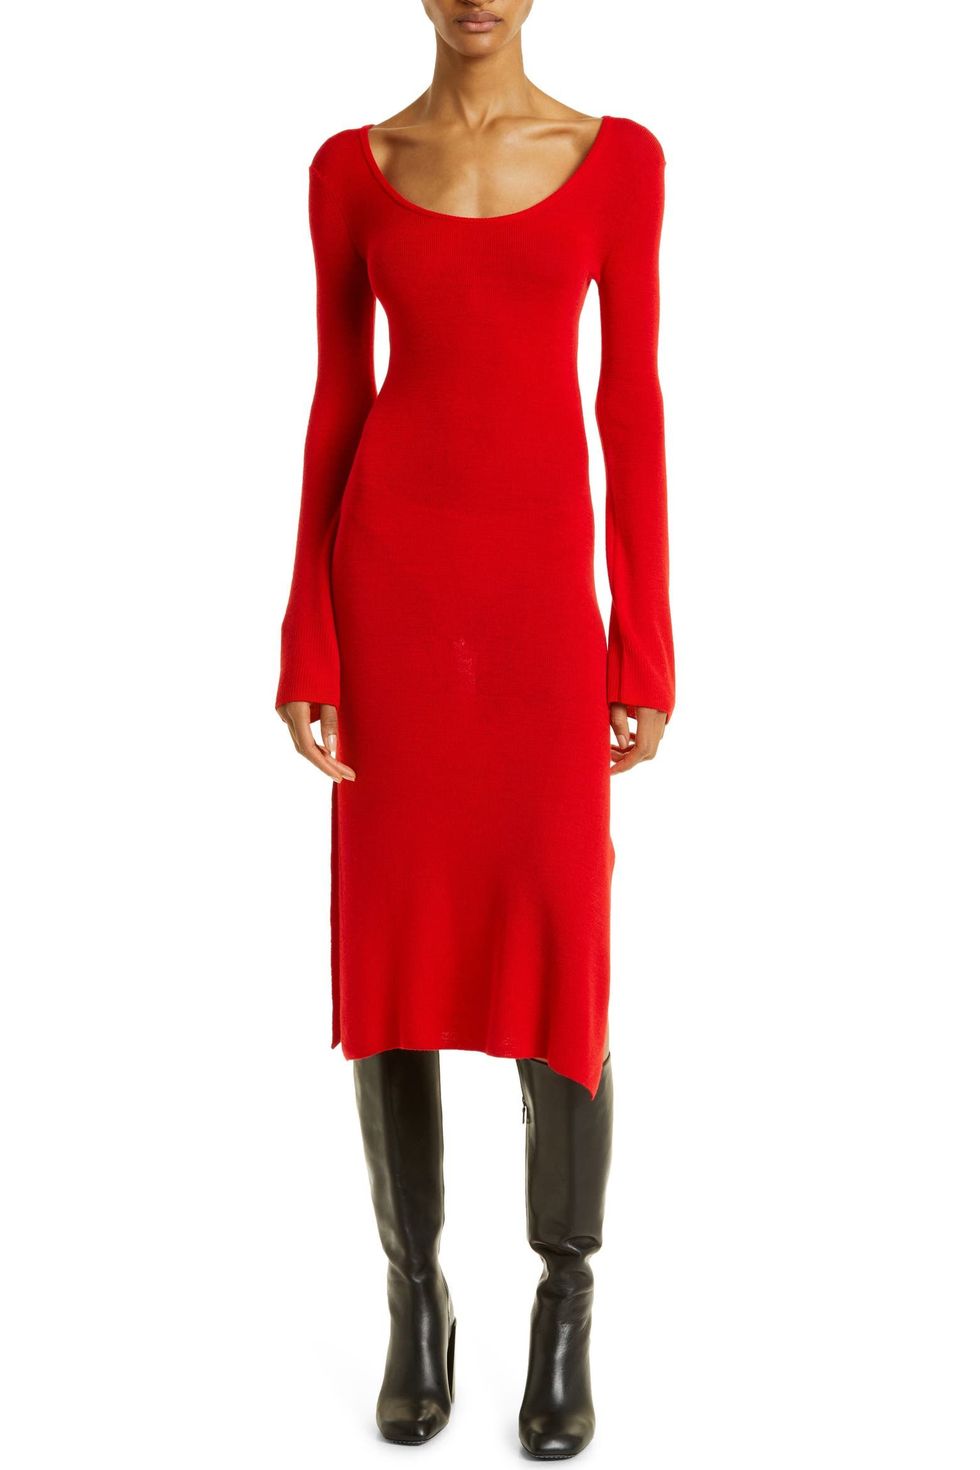 Cecily Long Sleeve Merino Wool Sweater Dress in Adrenaline Rush at Nordstrom, Size Large